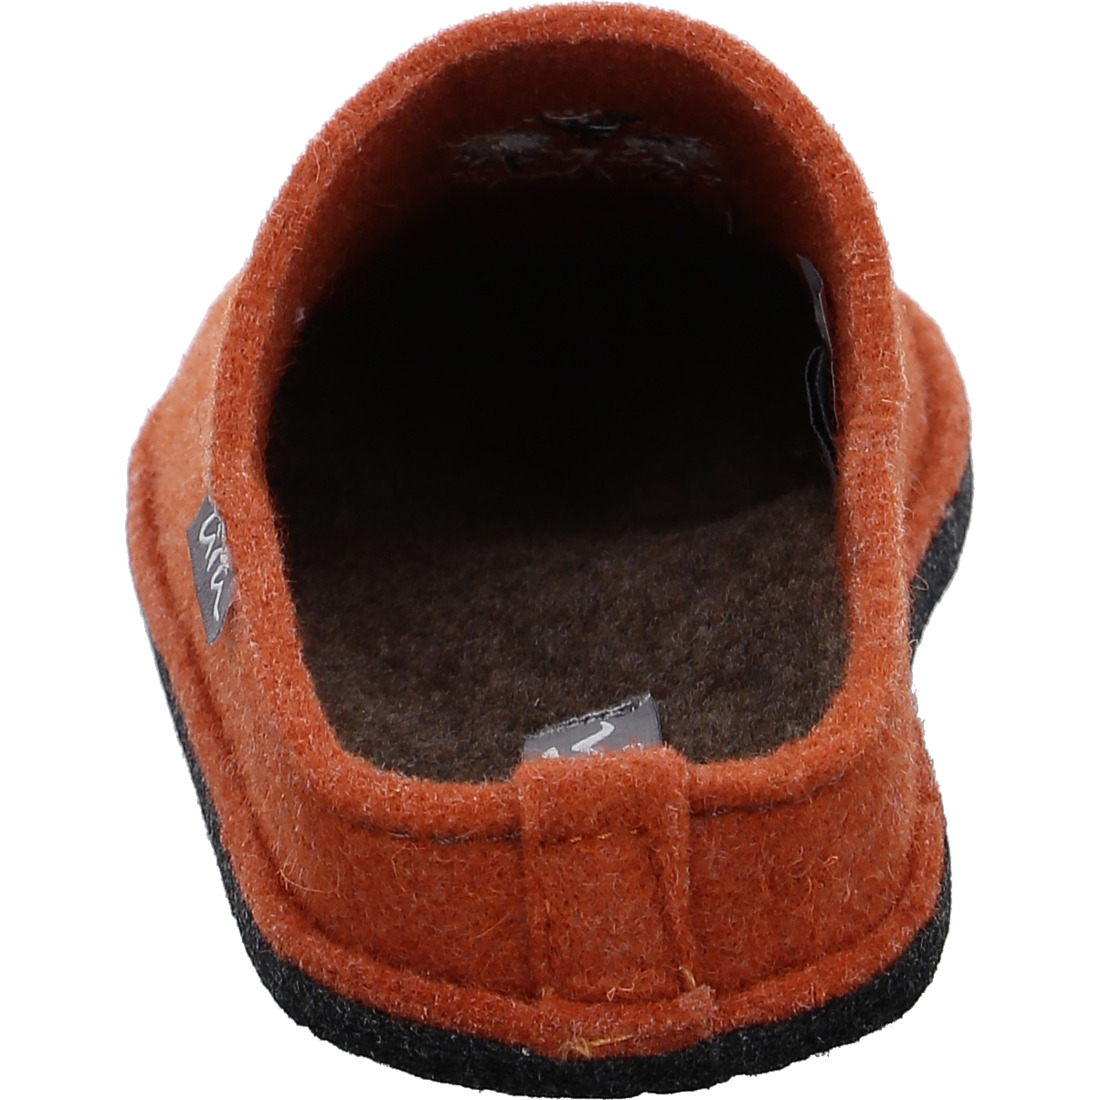 Chaussons*Ara Shoes Chaussons Chaussons Cosy orange